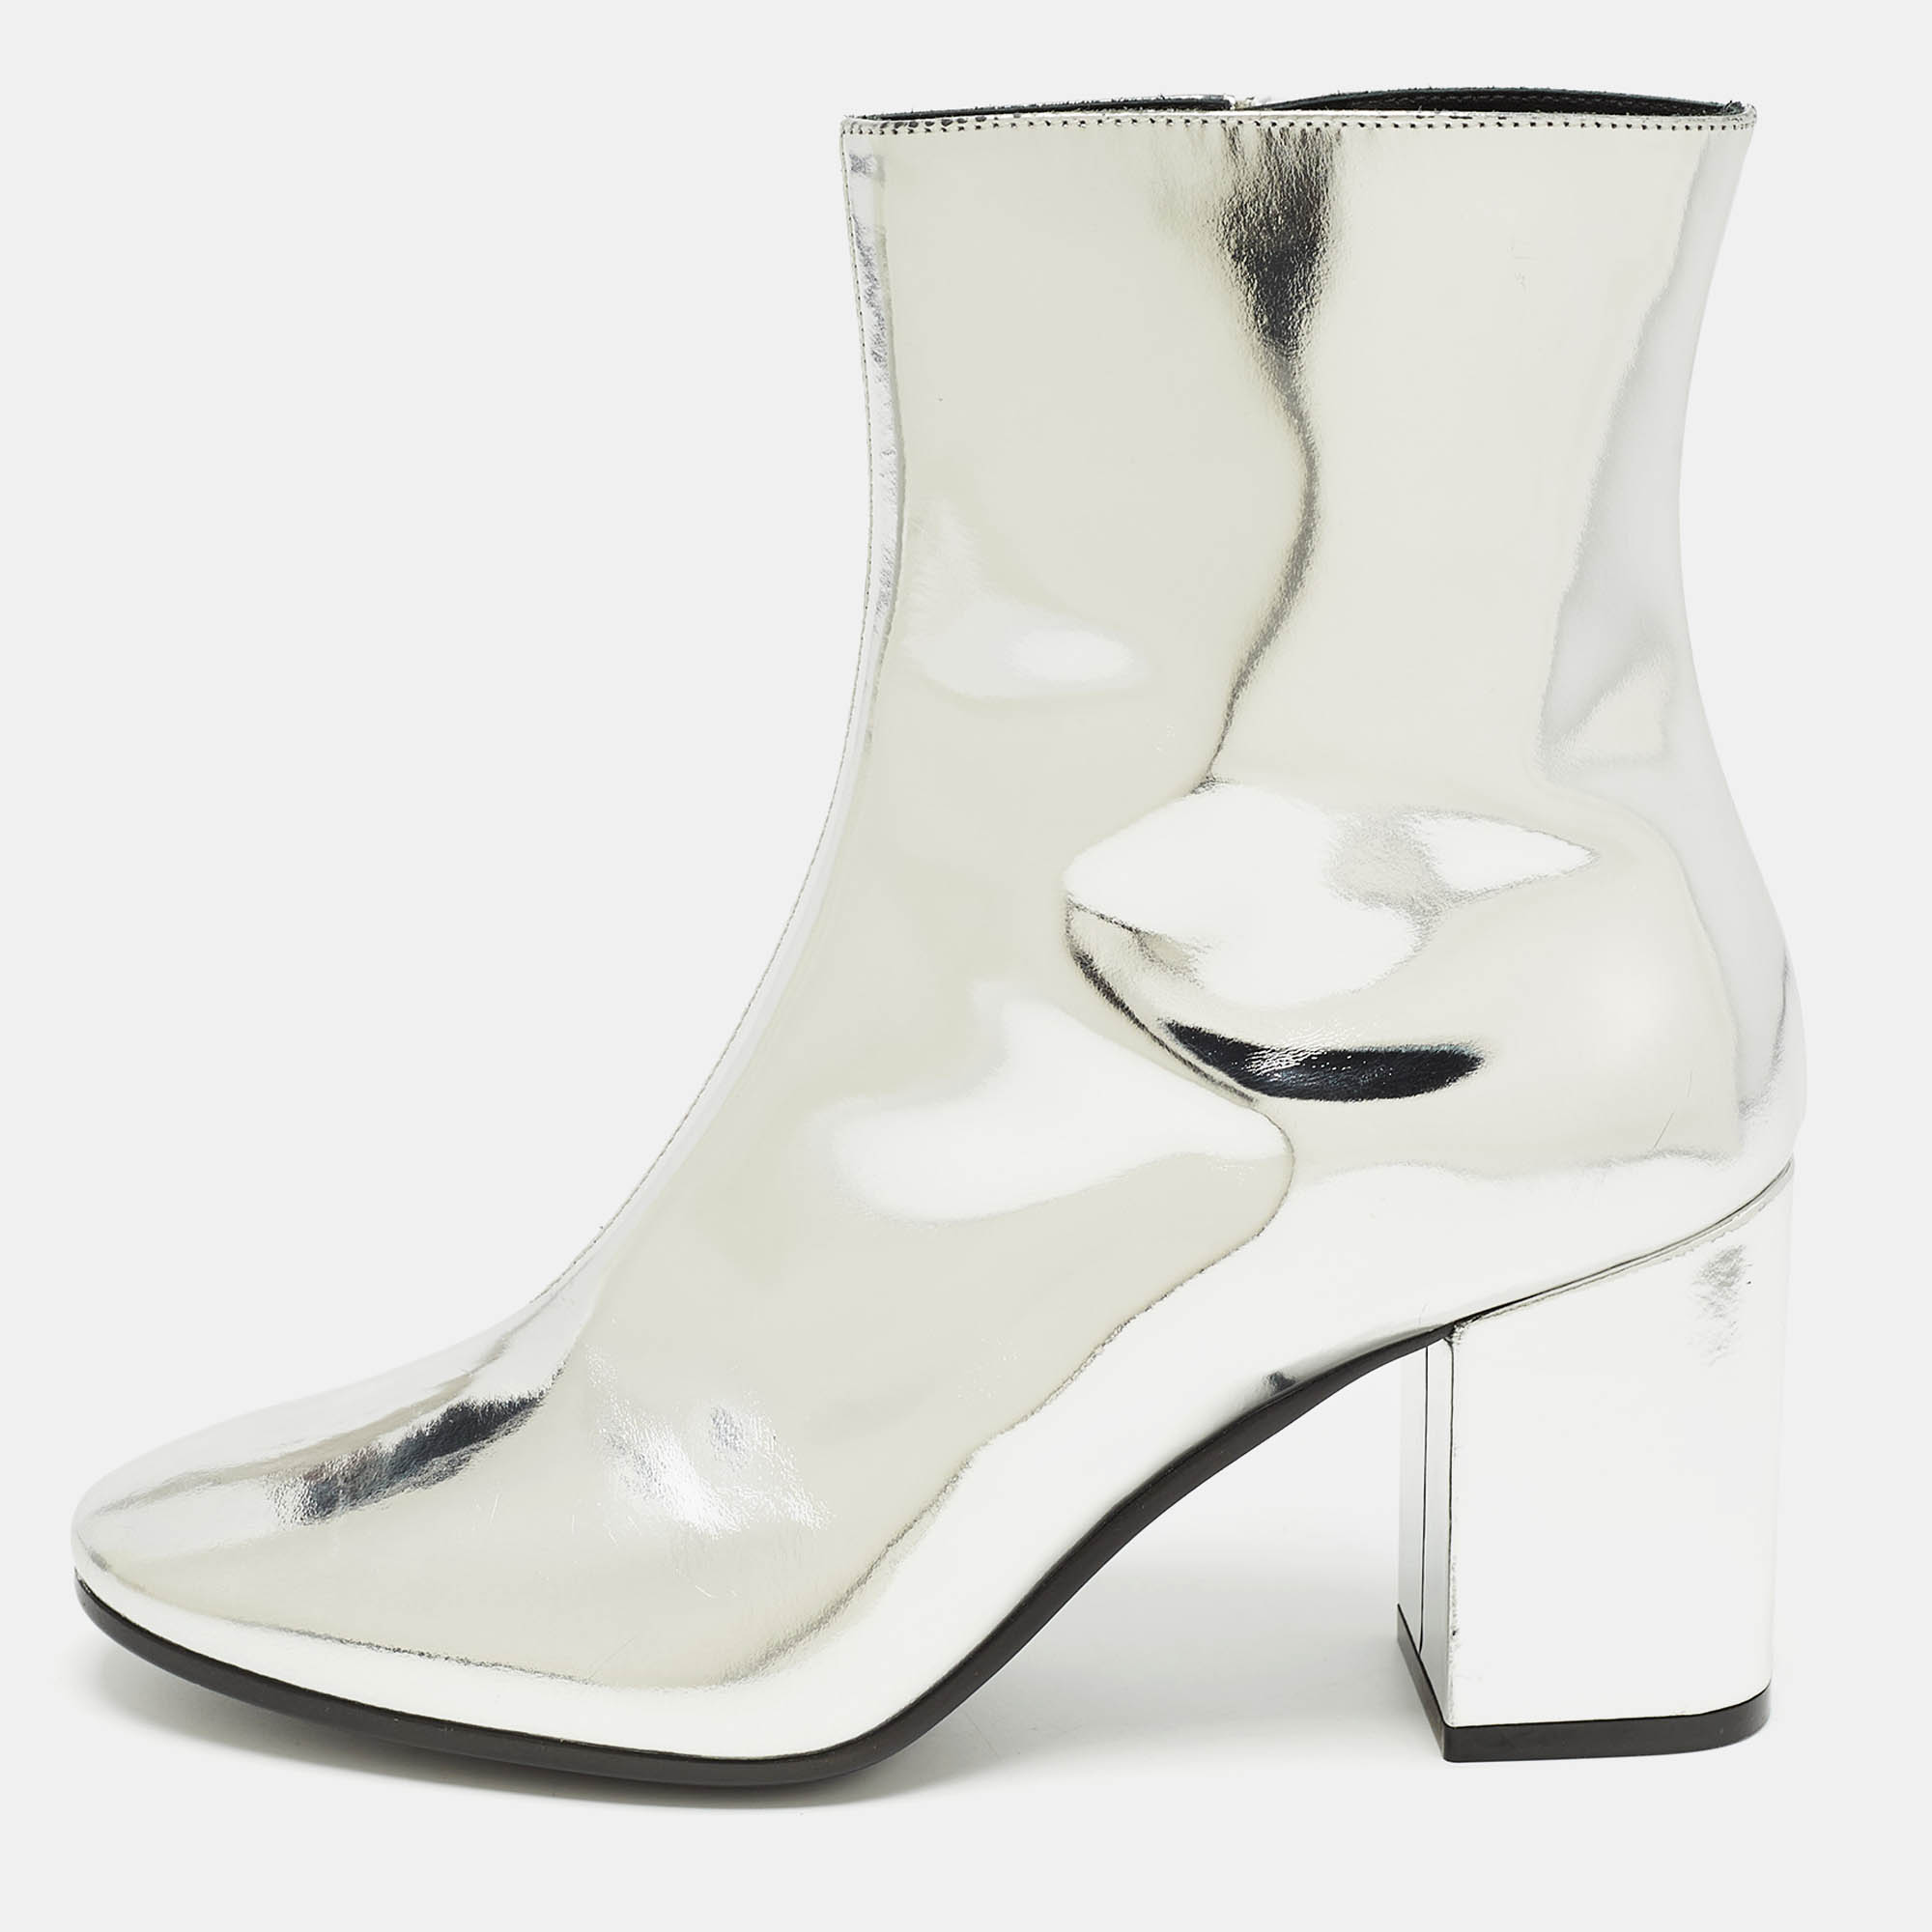 Balenciaga silver patent leather zip ankle boots size 36